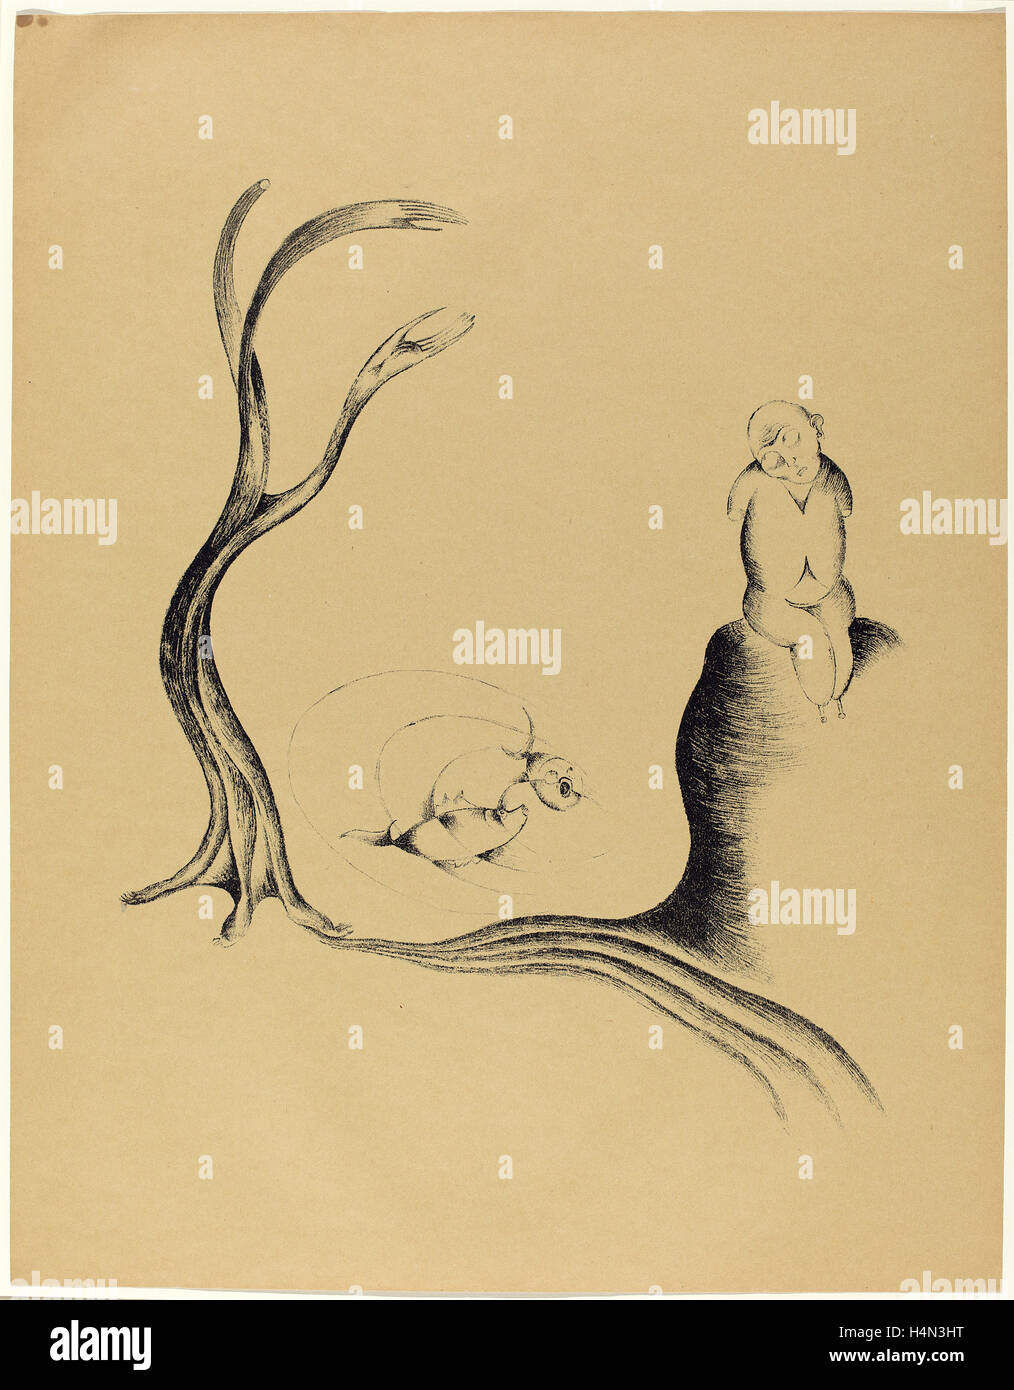 Heinrich Hoerle, Der Baum der Sehnsucht (The Tree of Longing), German, 1895 - 1936, 1920, lithograph on pale brown paper Stock Photo